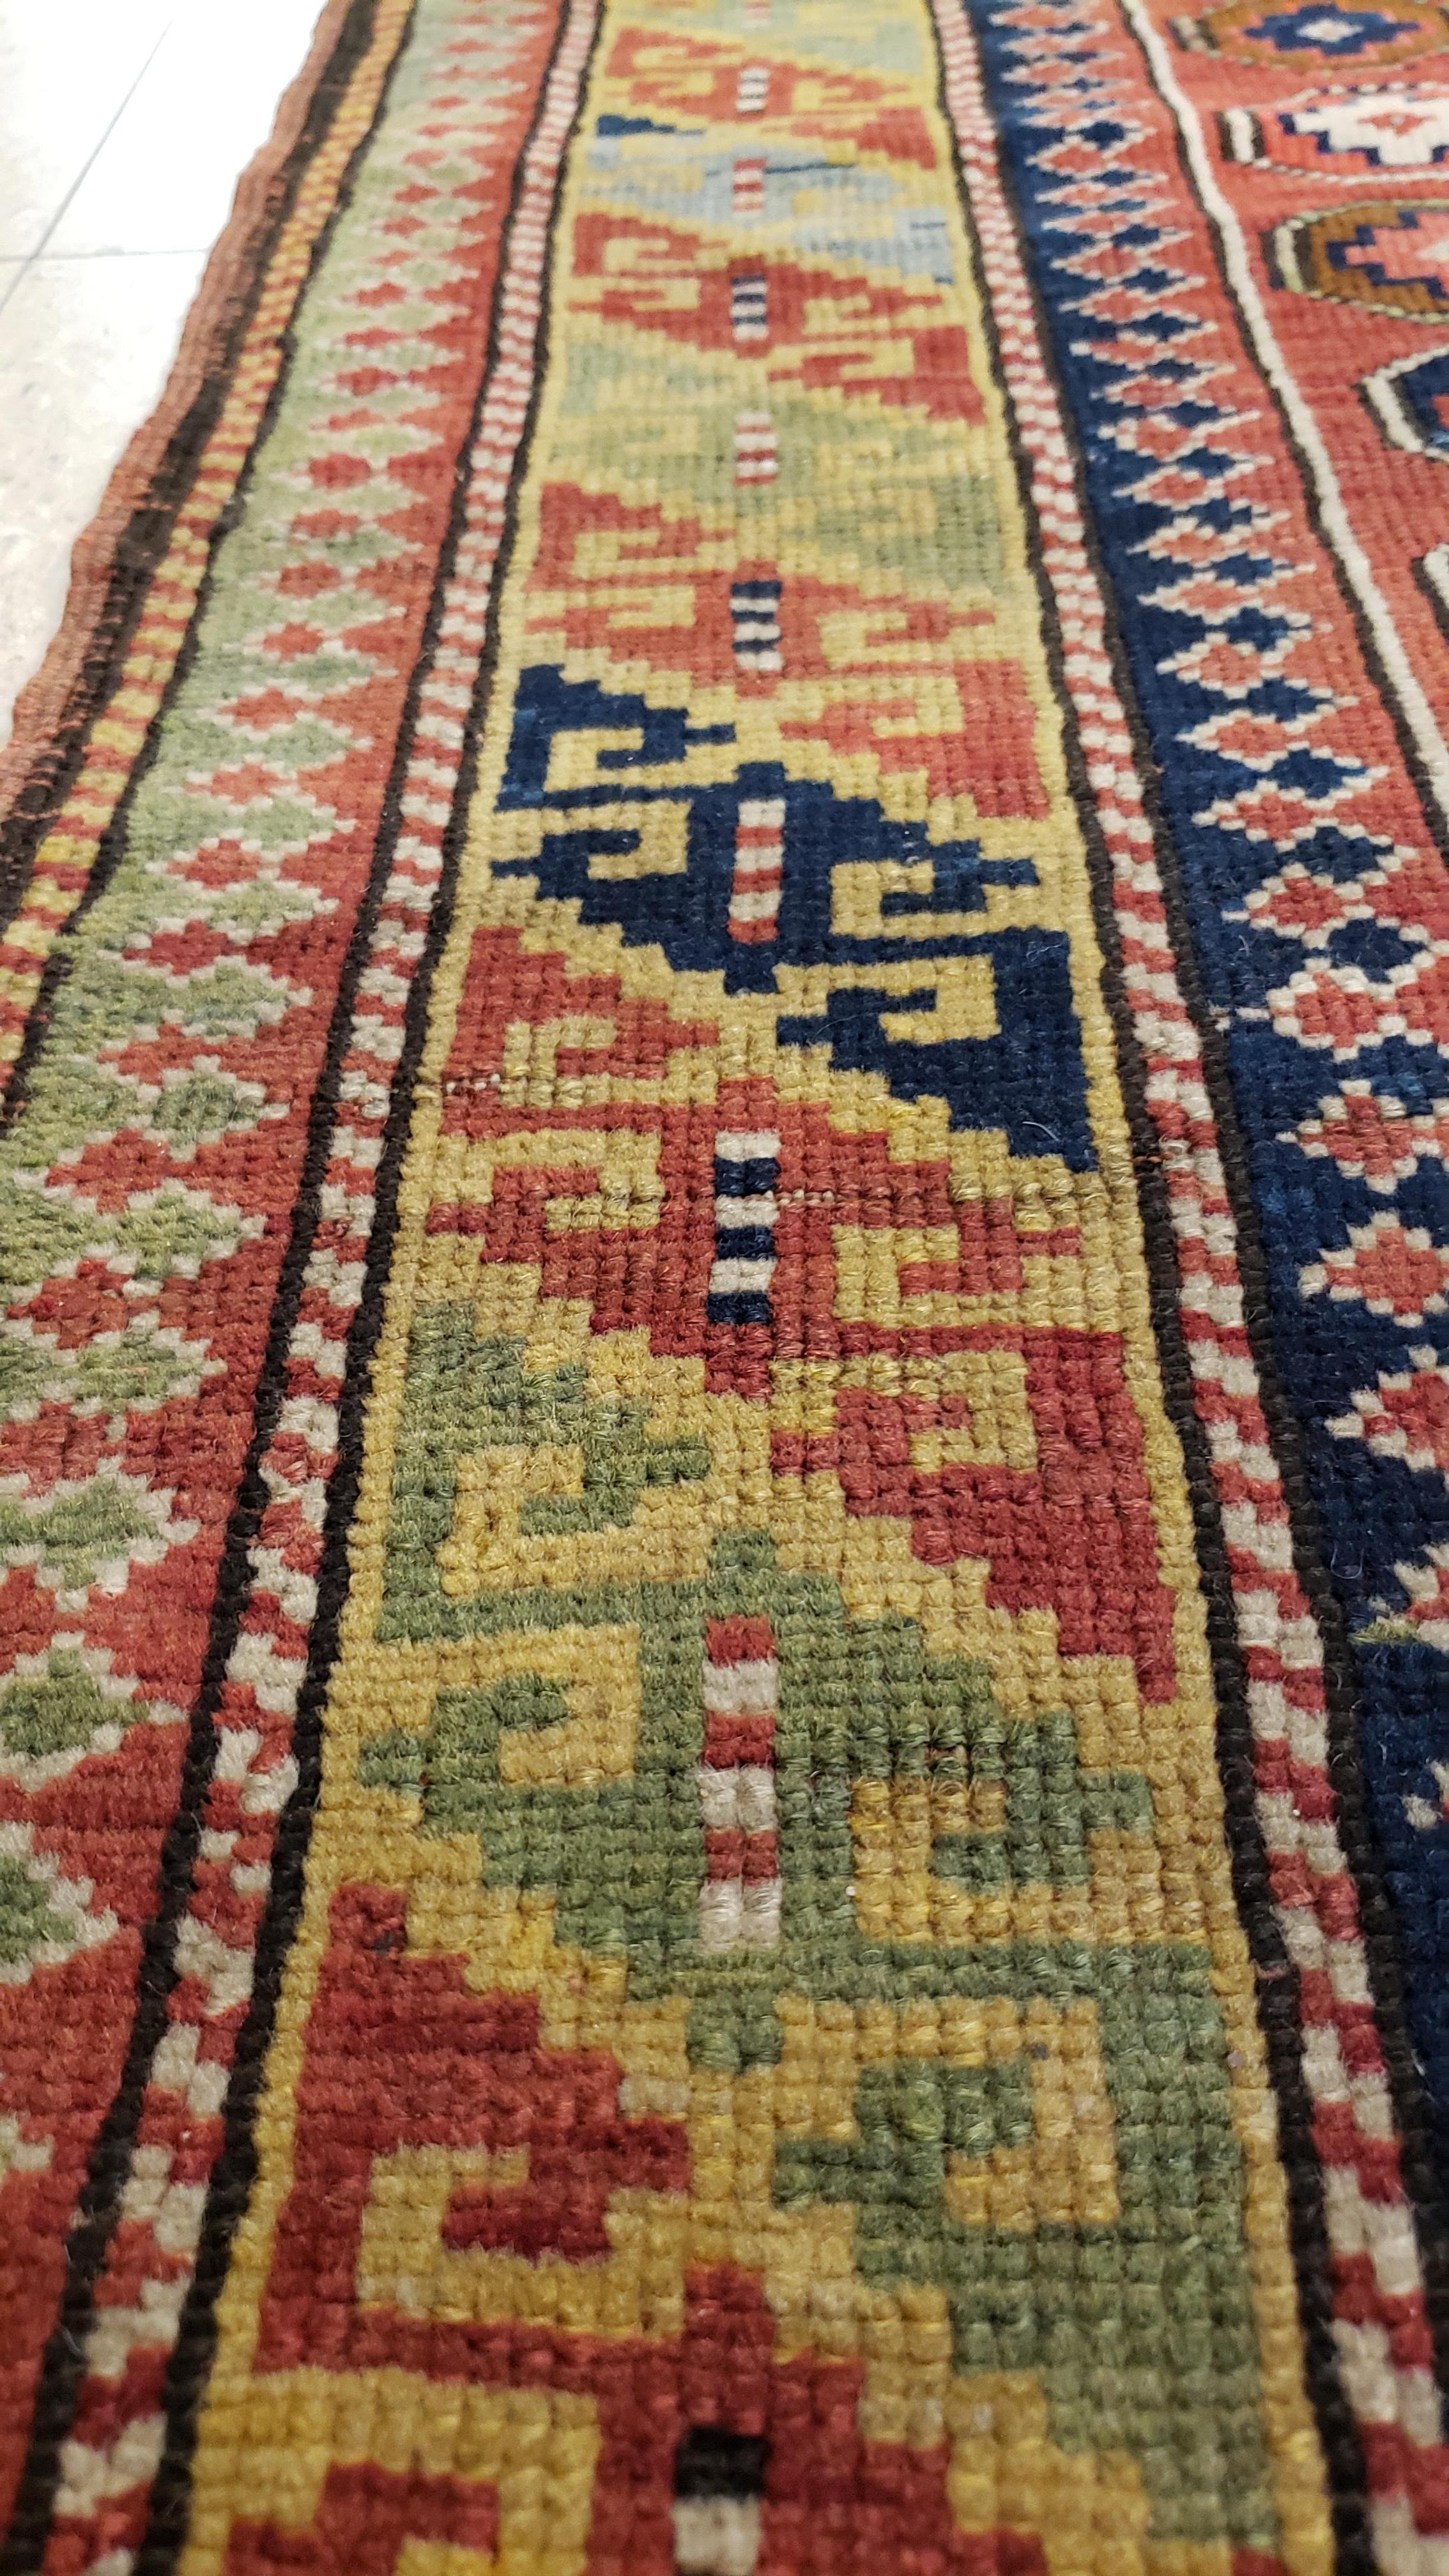 Antique Kuba Rug, Handmade Oriental Rug, Red, Green, Yellow, Ivory, Blue, White In Excellent Condition For Sale In Port Washington, NY